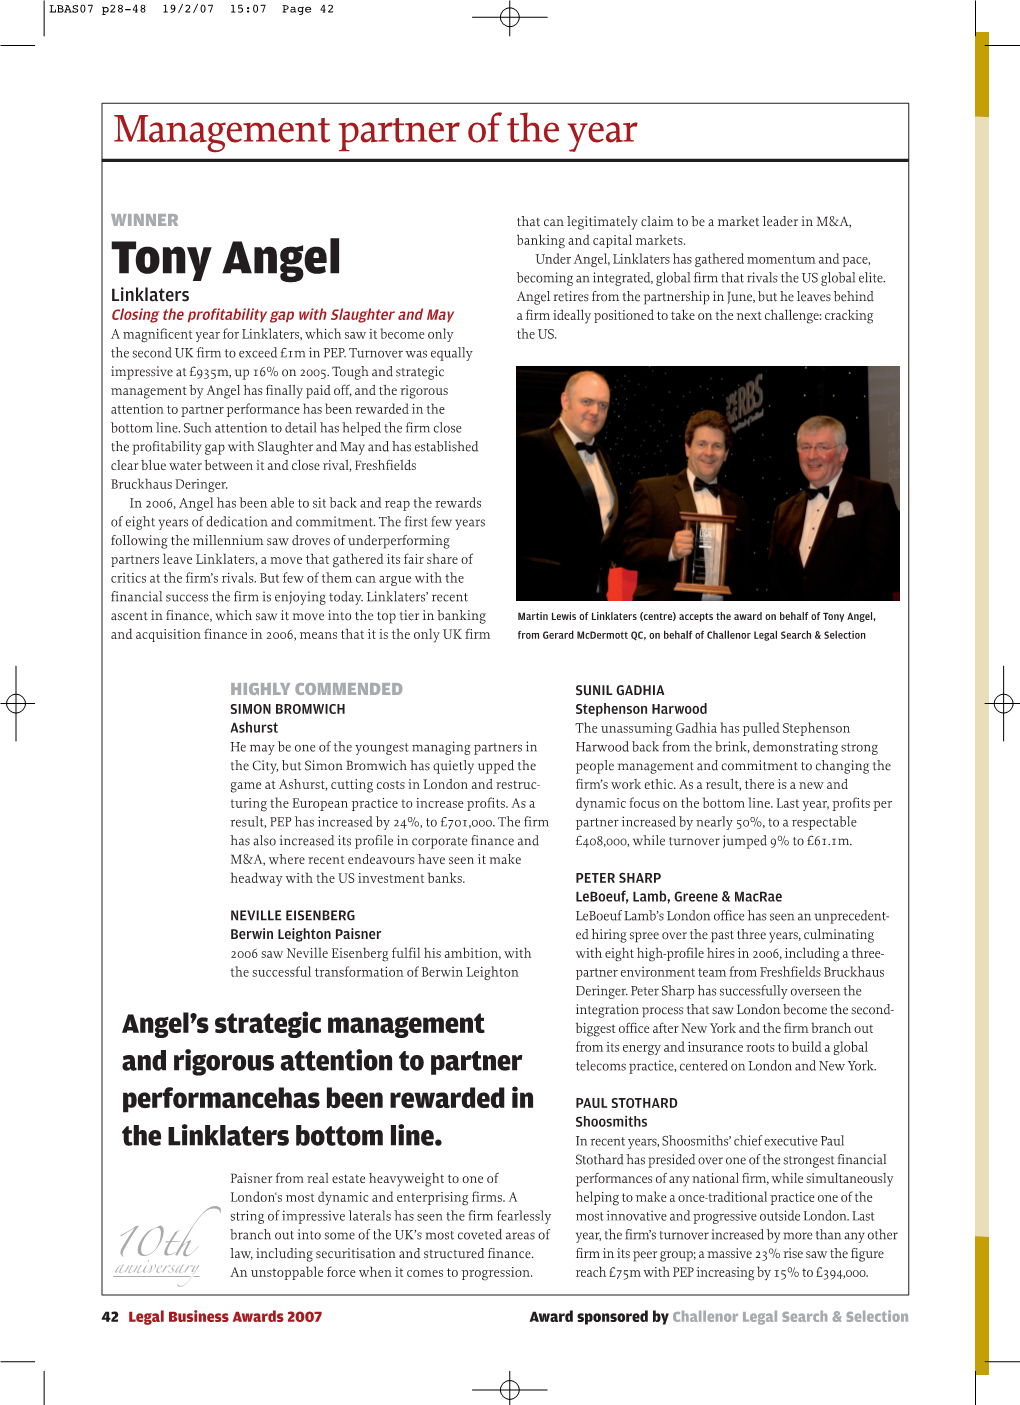 Tony Angel Becoming an Integrated, Global Firm That Rivals the US Global Elite